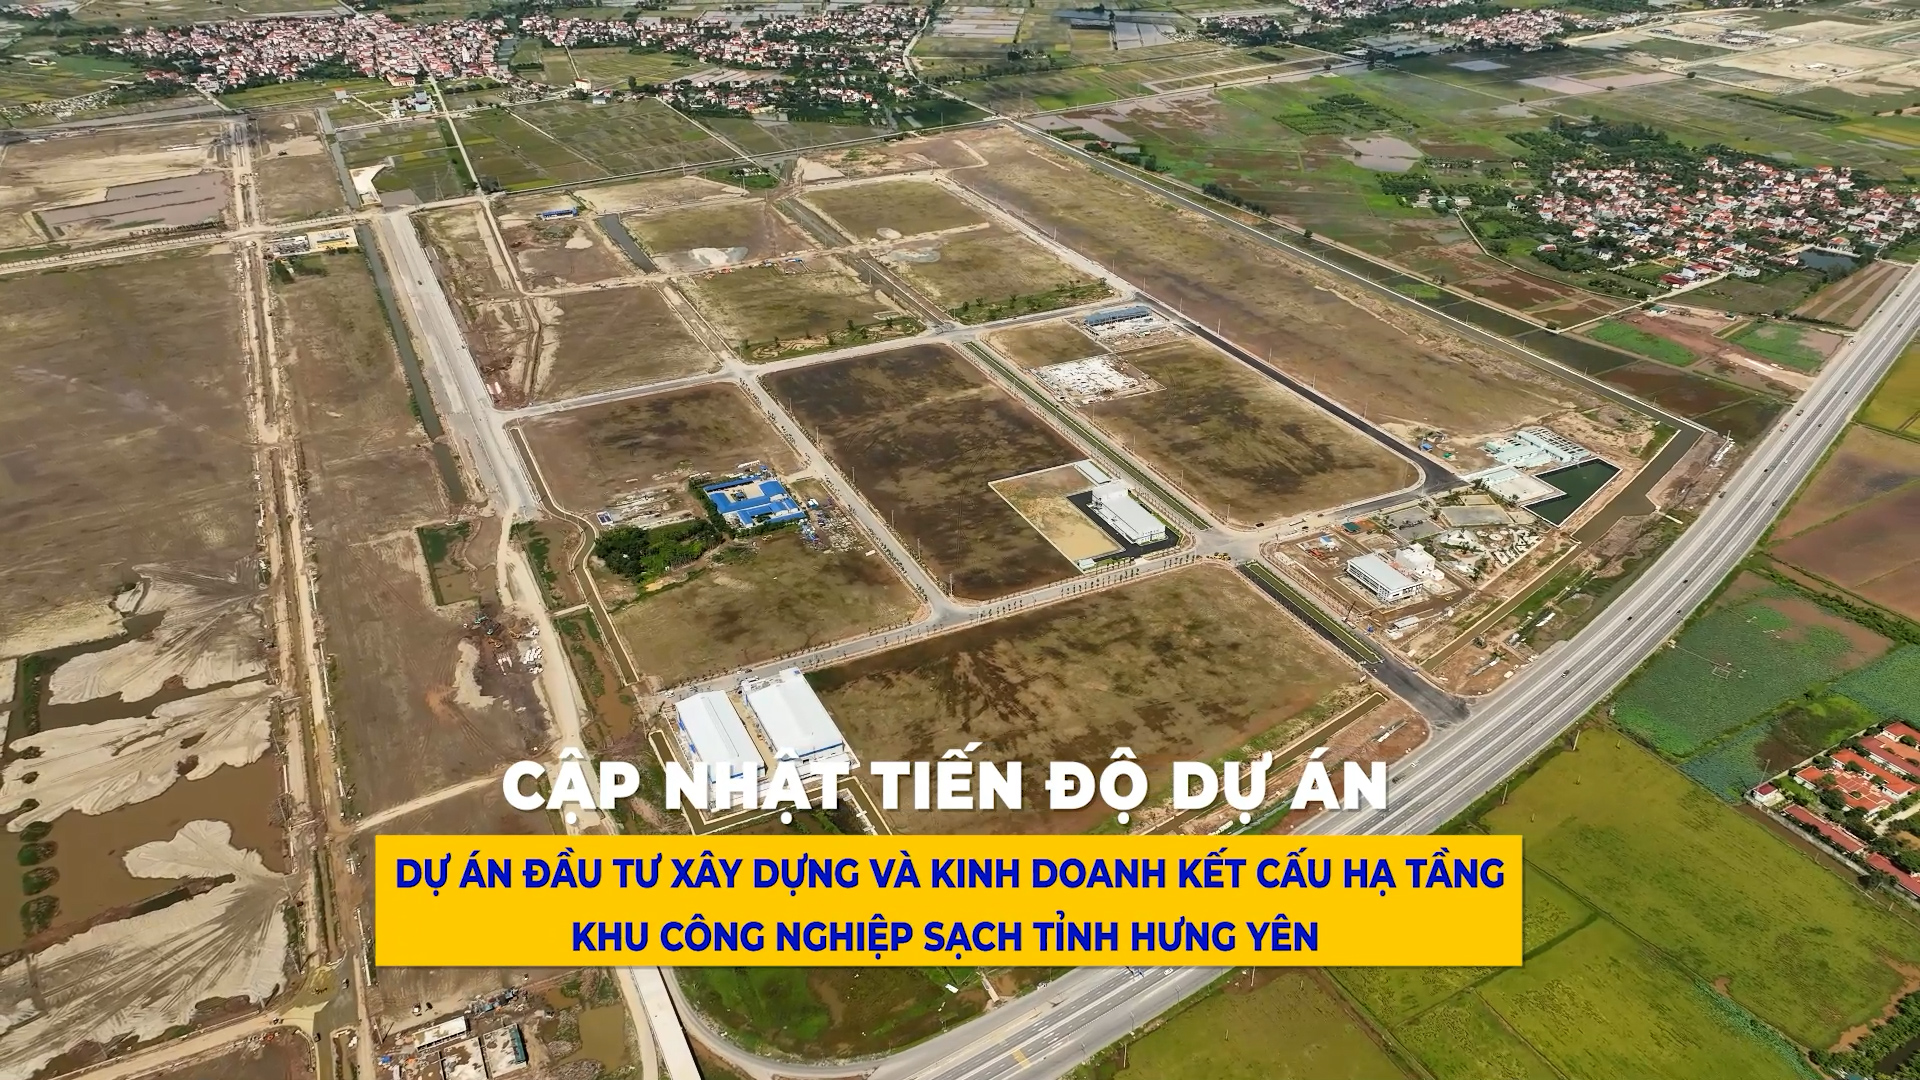 Progress of the Investment Project to build a Clean Industrial Park in Hung Yen Province